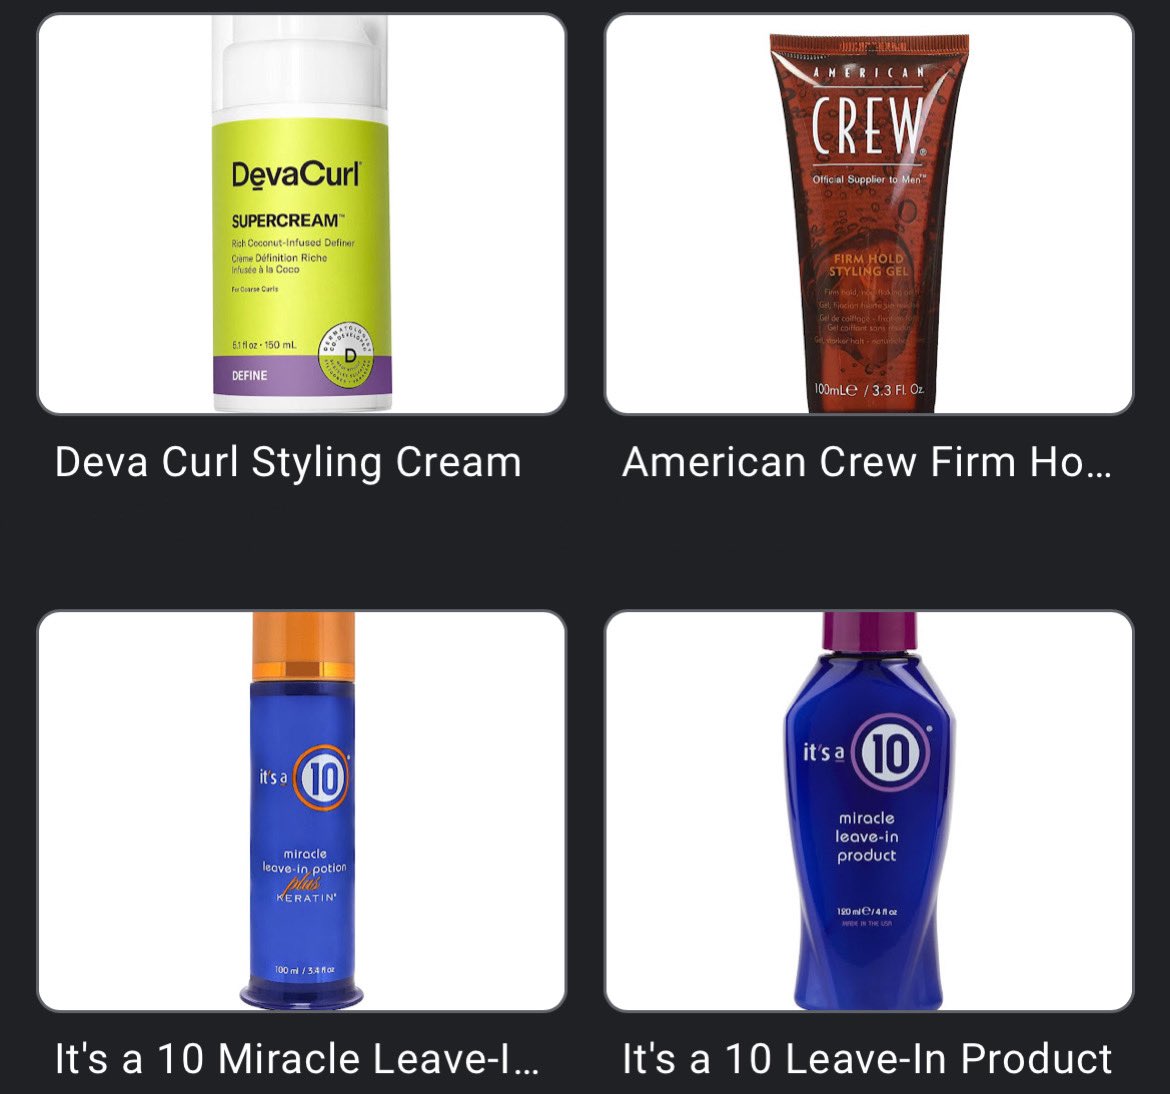 +6 more including Olaplex
15% OFF ALL PRODUCTS
(ends 6/1)

#Shampoo #Conditioner #Styling #Product #HairSalon #SupportSmallBusiness @brazilianblowout @wellahairusa @wellahair @redken @redkenpro @olaplex @itsa10haircare @devacurl  @paulmitchell @bedheadbytigi @americancrew